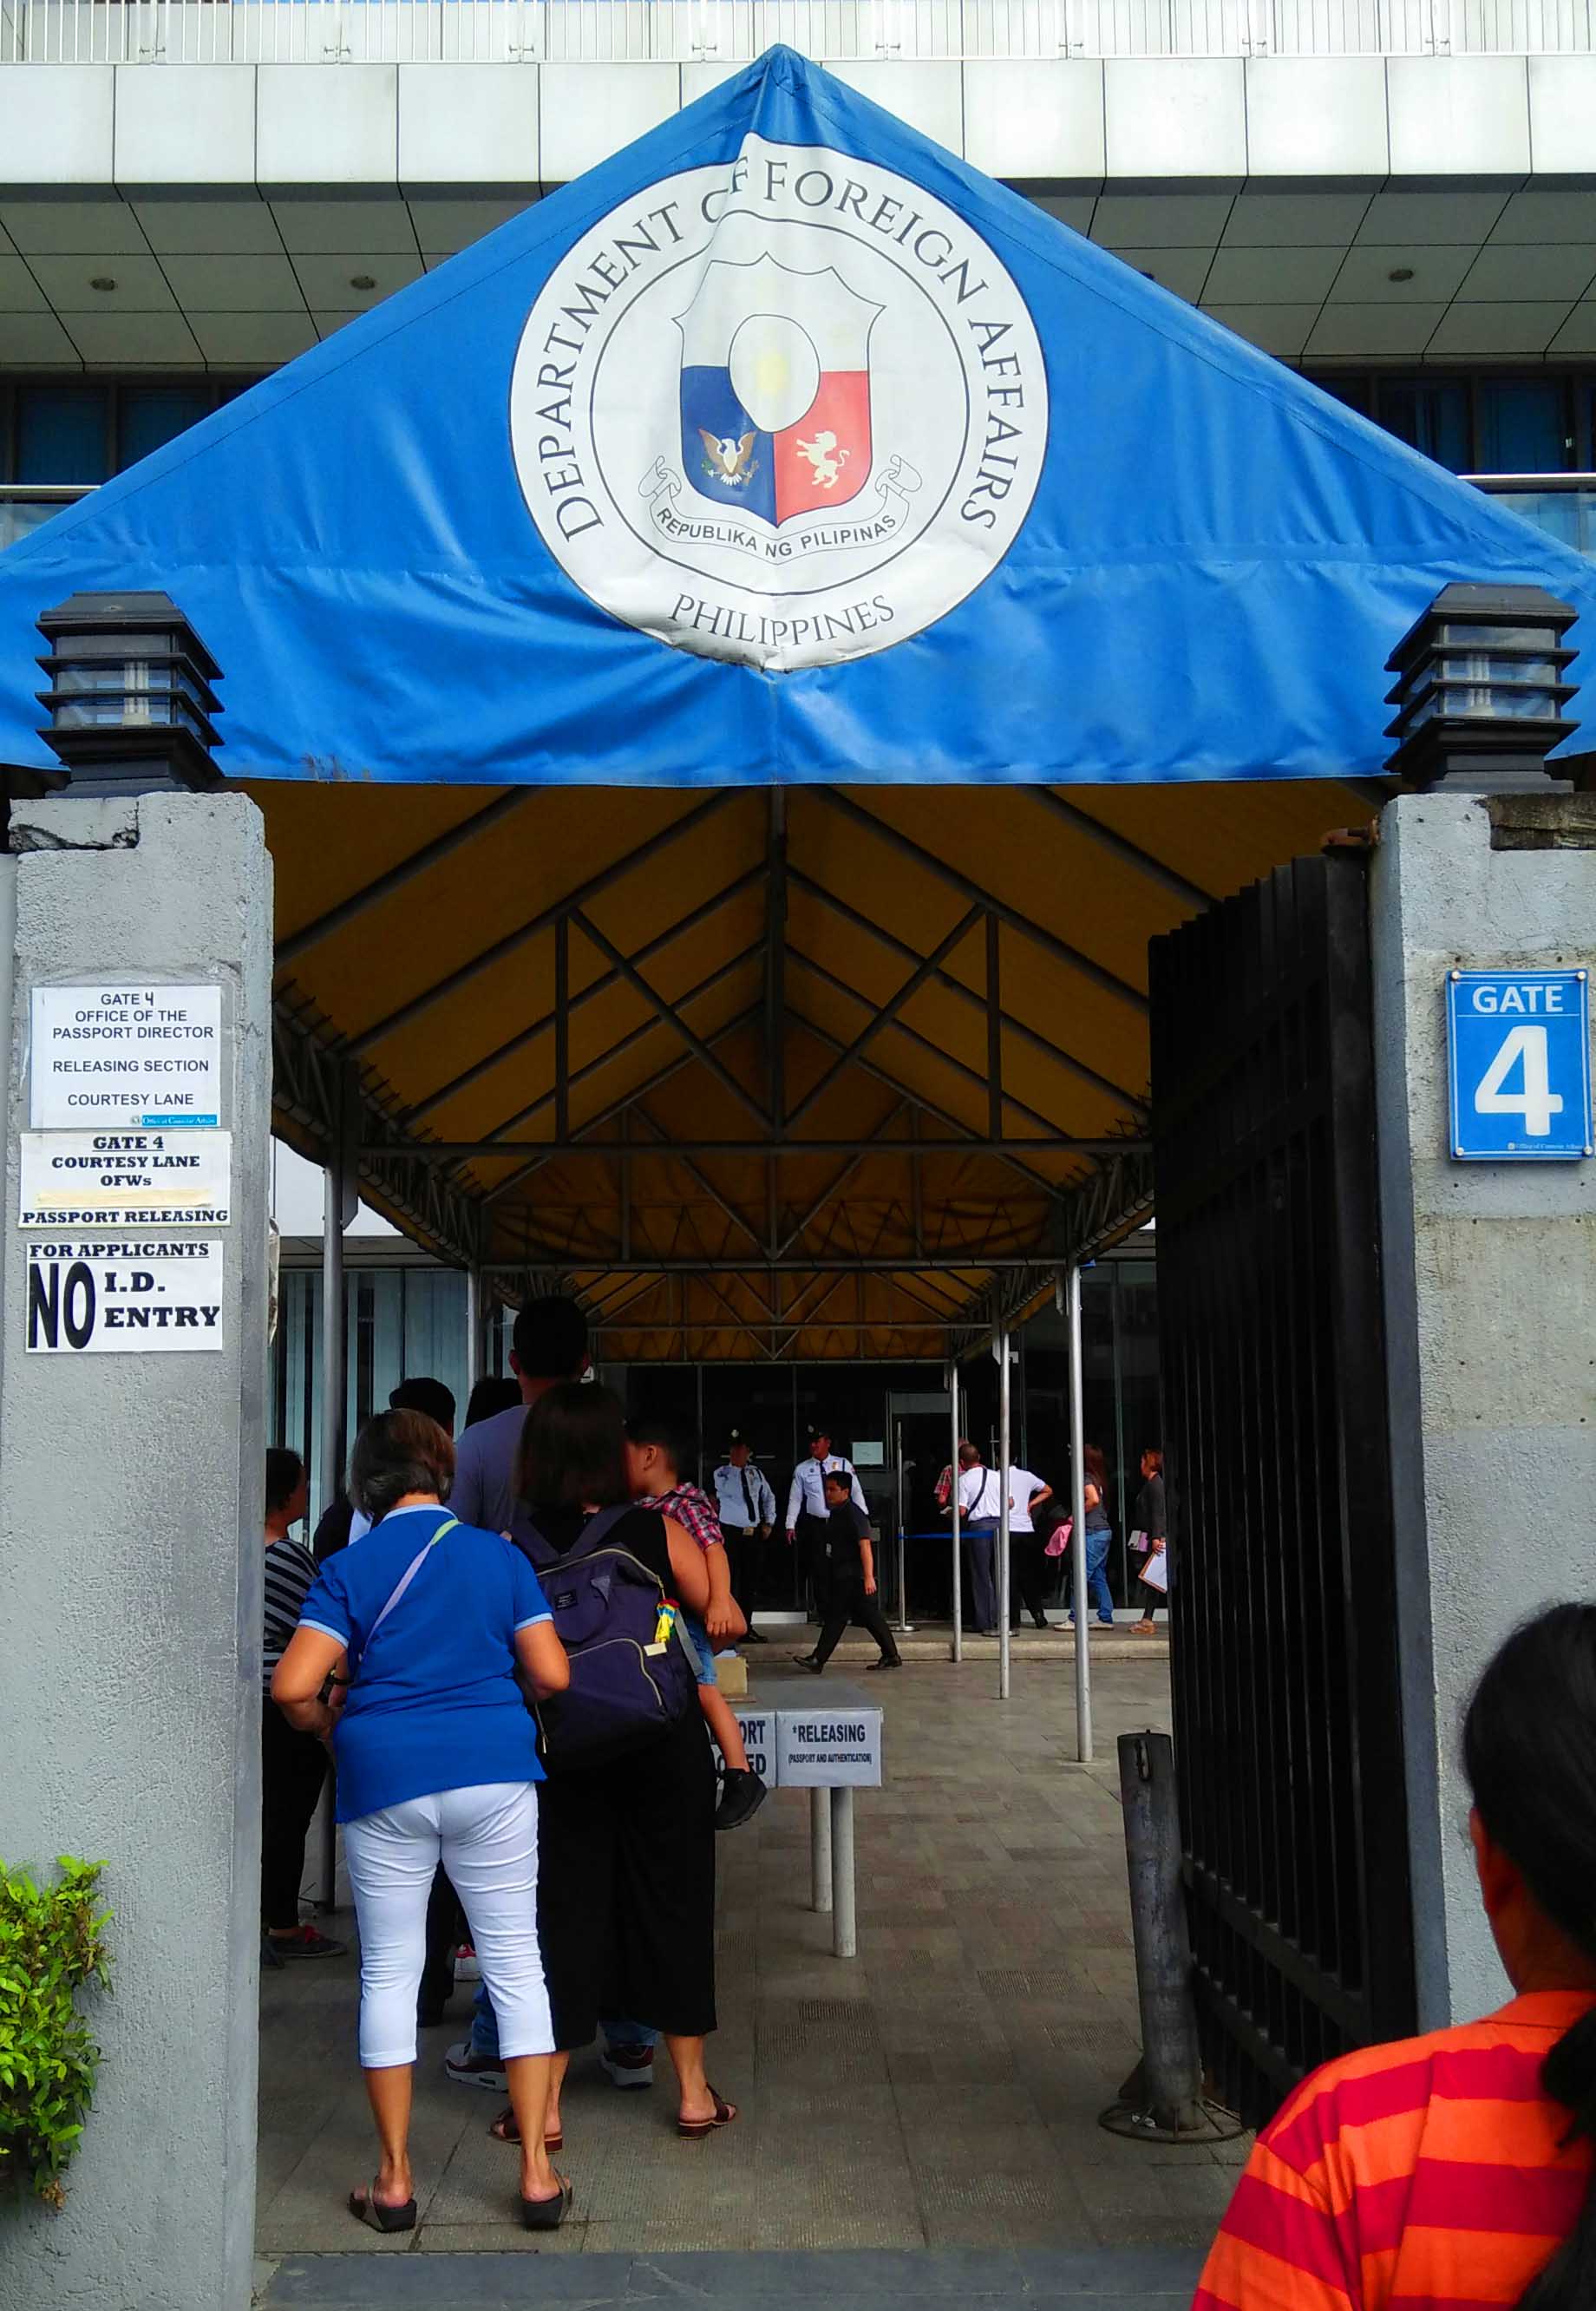 Passport applicants falling in line for security checks at the gate in DFA Aseana.